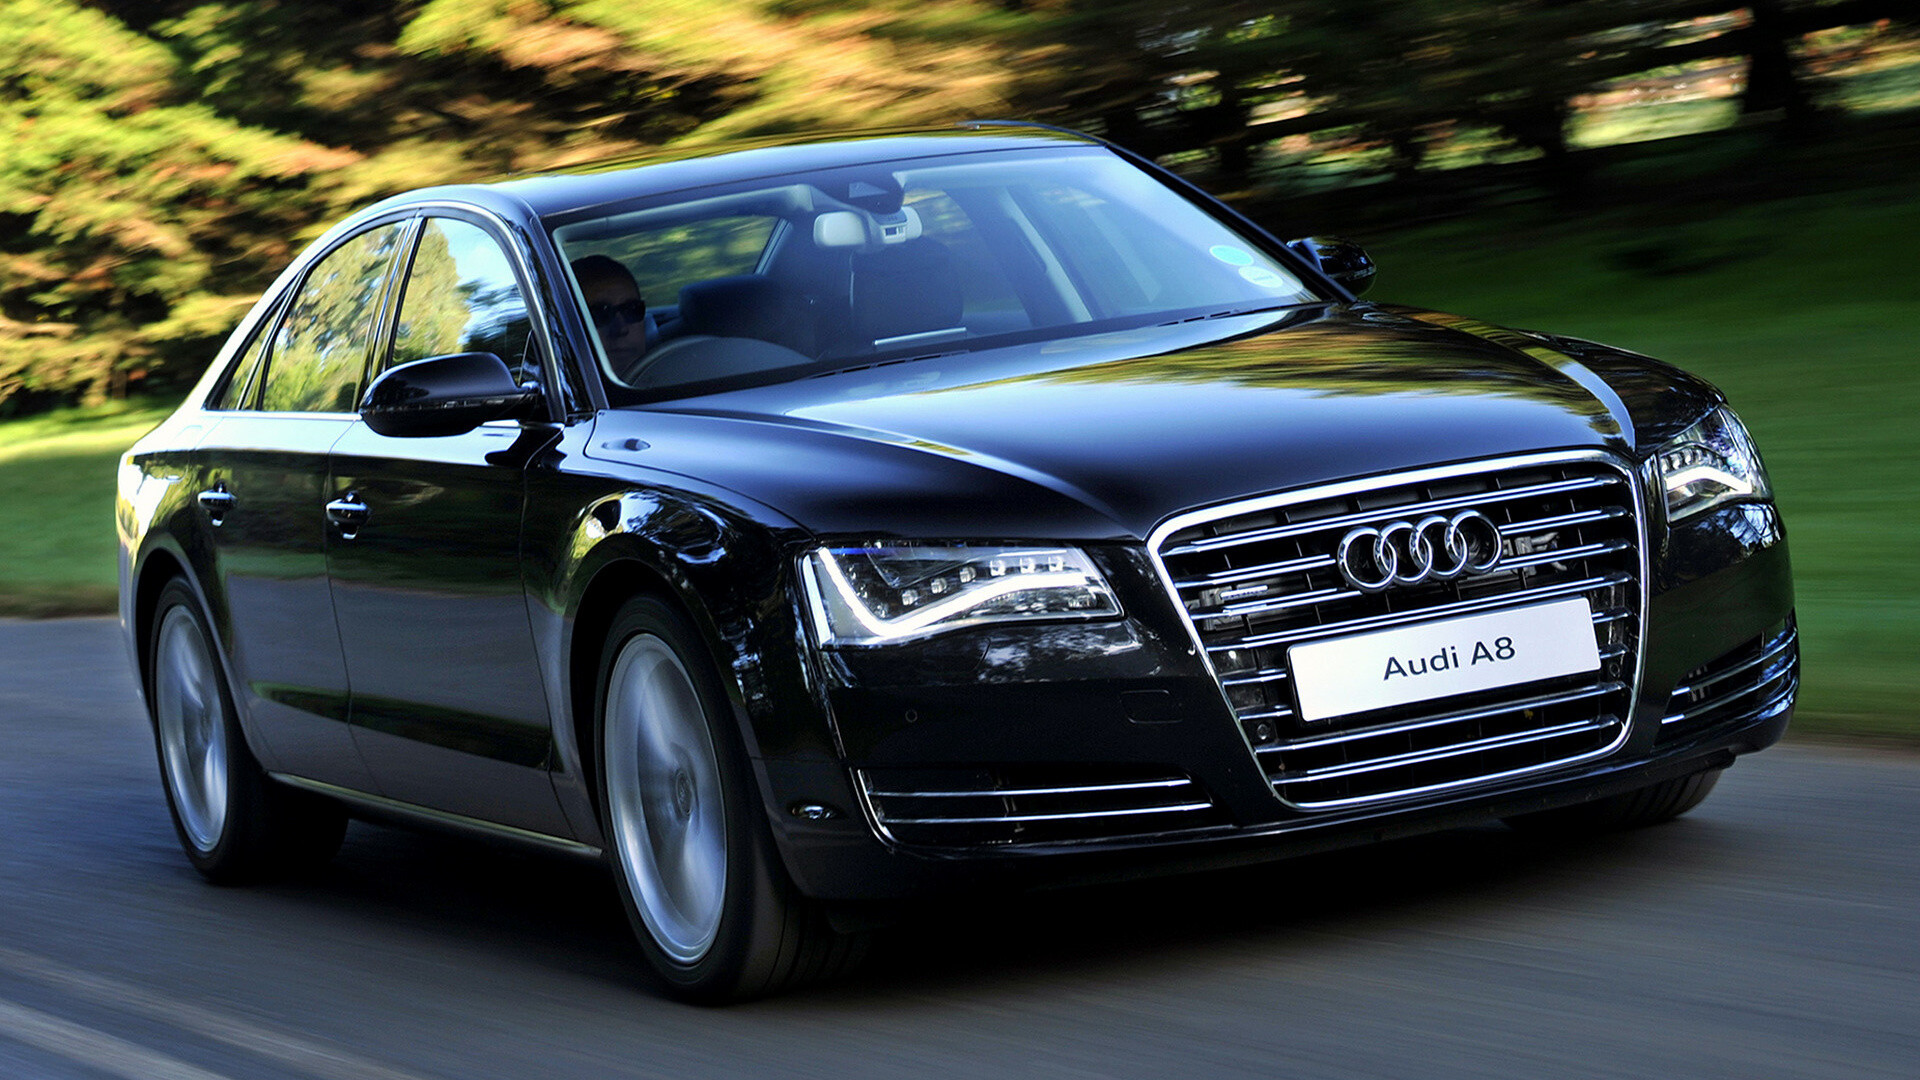 Audi A8: German sedan that represents status and exudes authority. 1920x1080 Full HD Background.